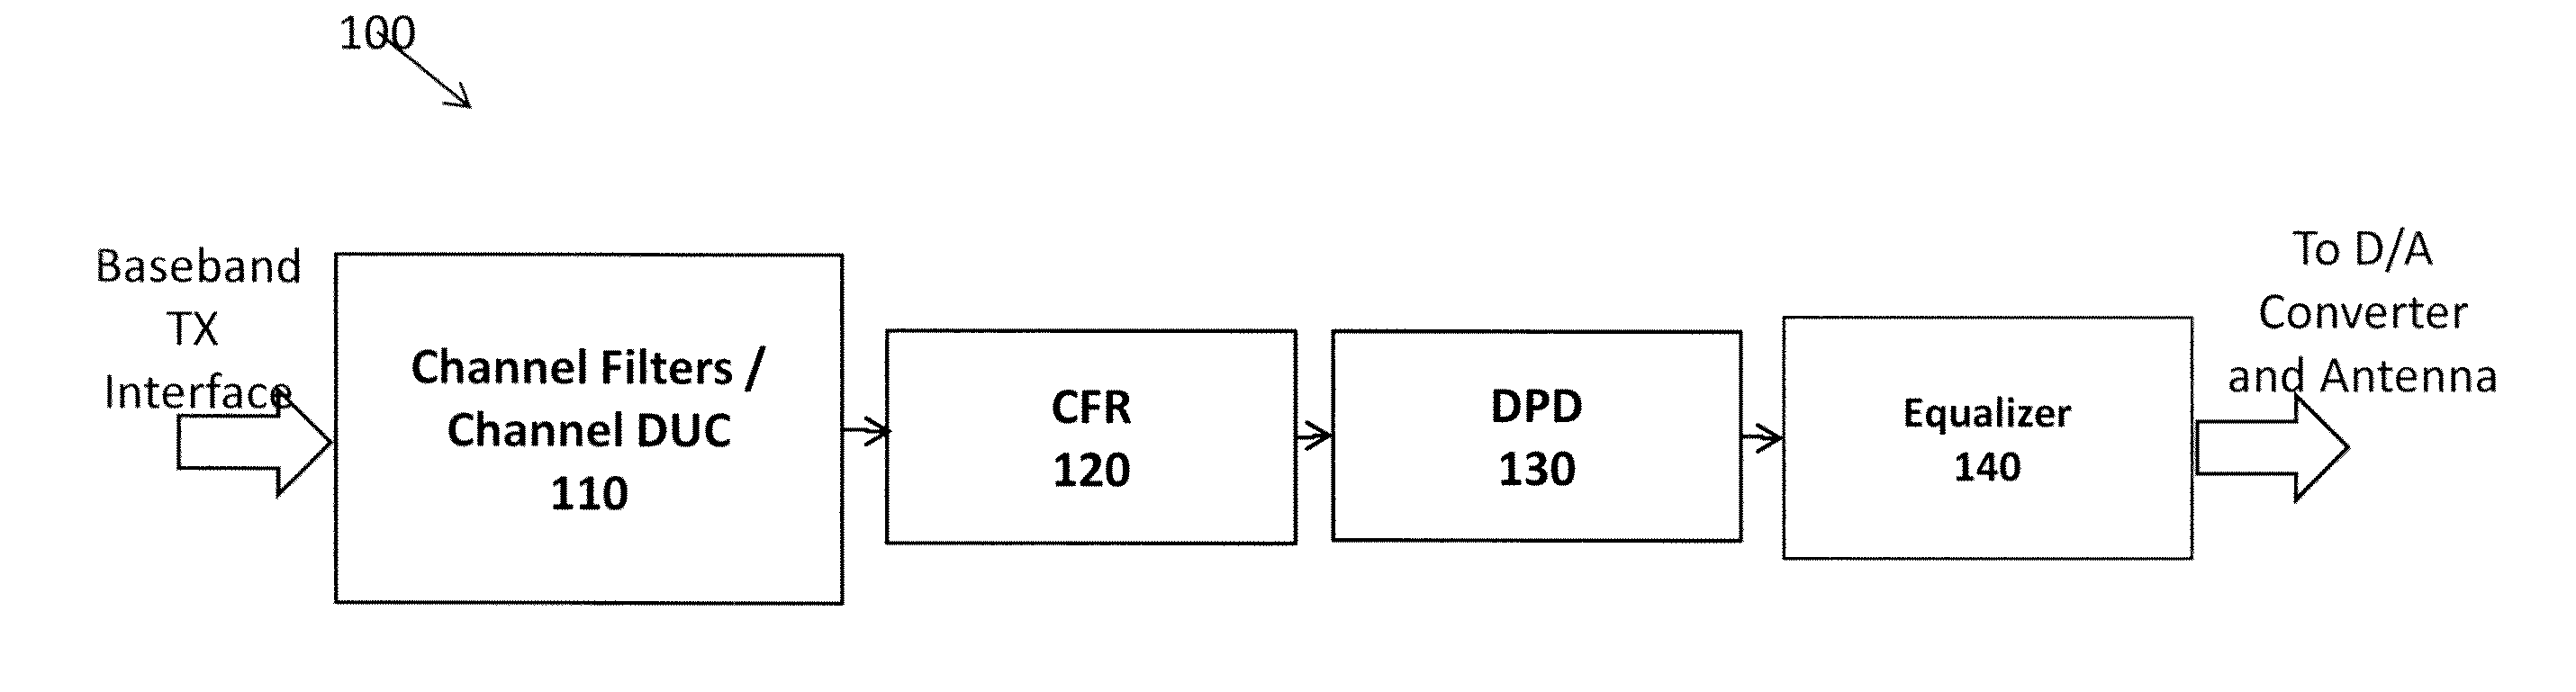 Multi-stage crest factor reduction (CFR) for multi-channel multi-standard radio